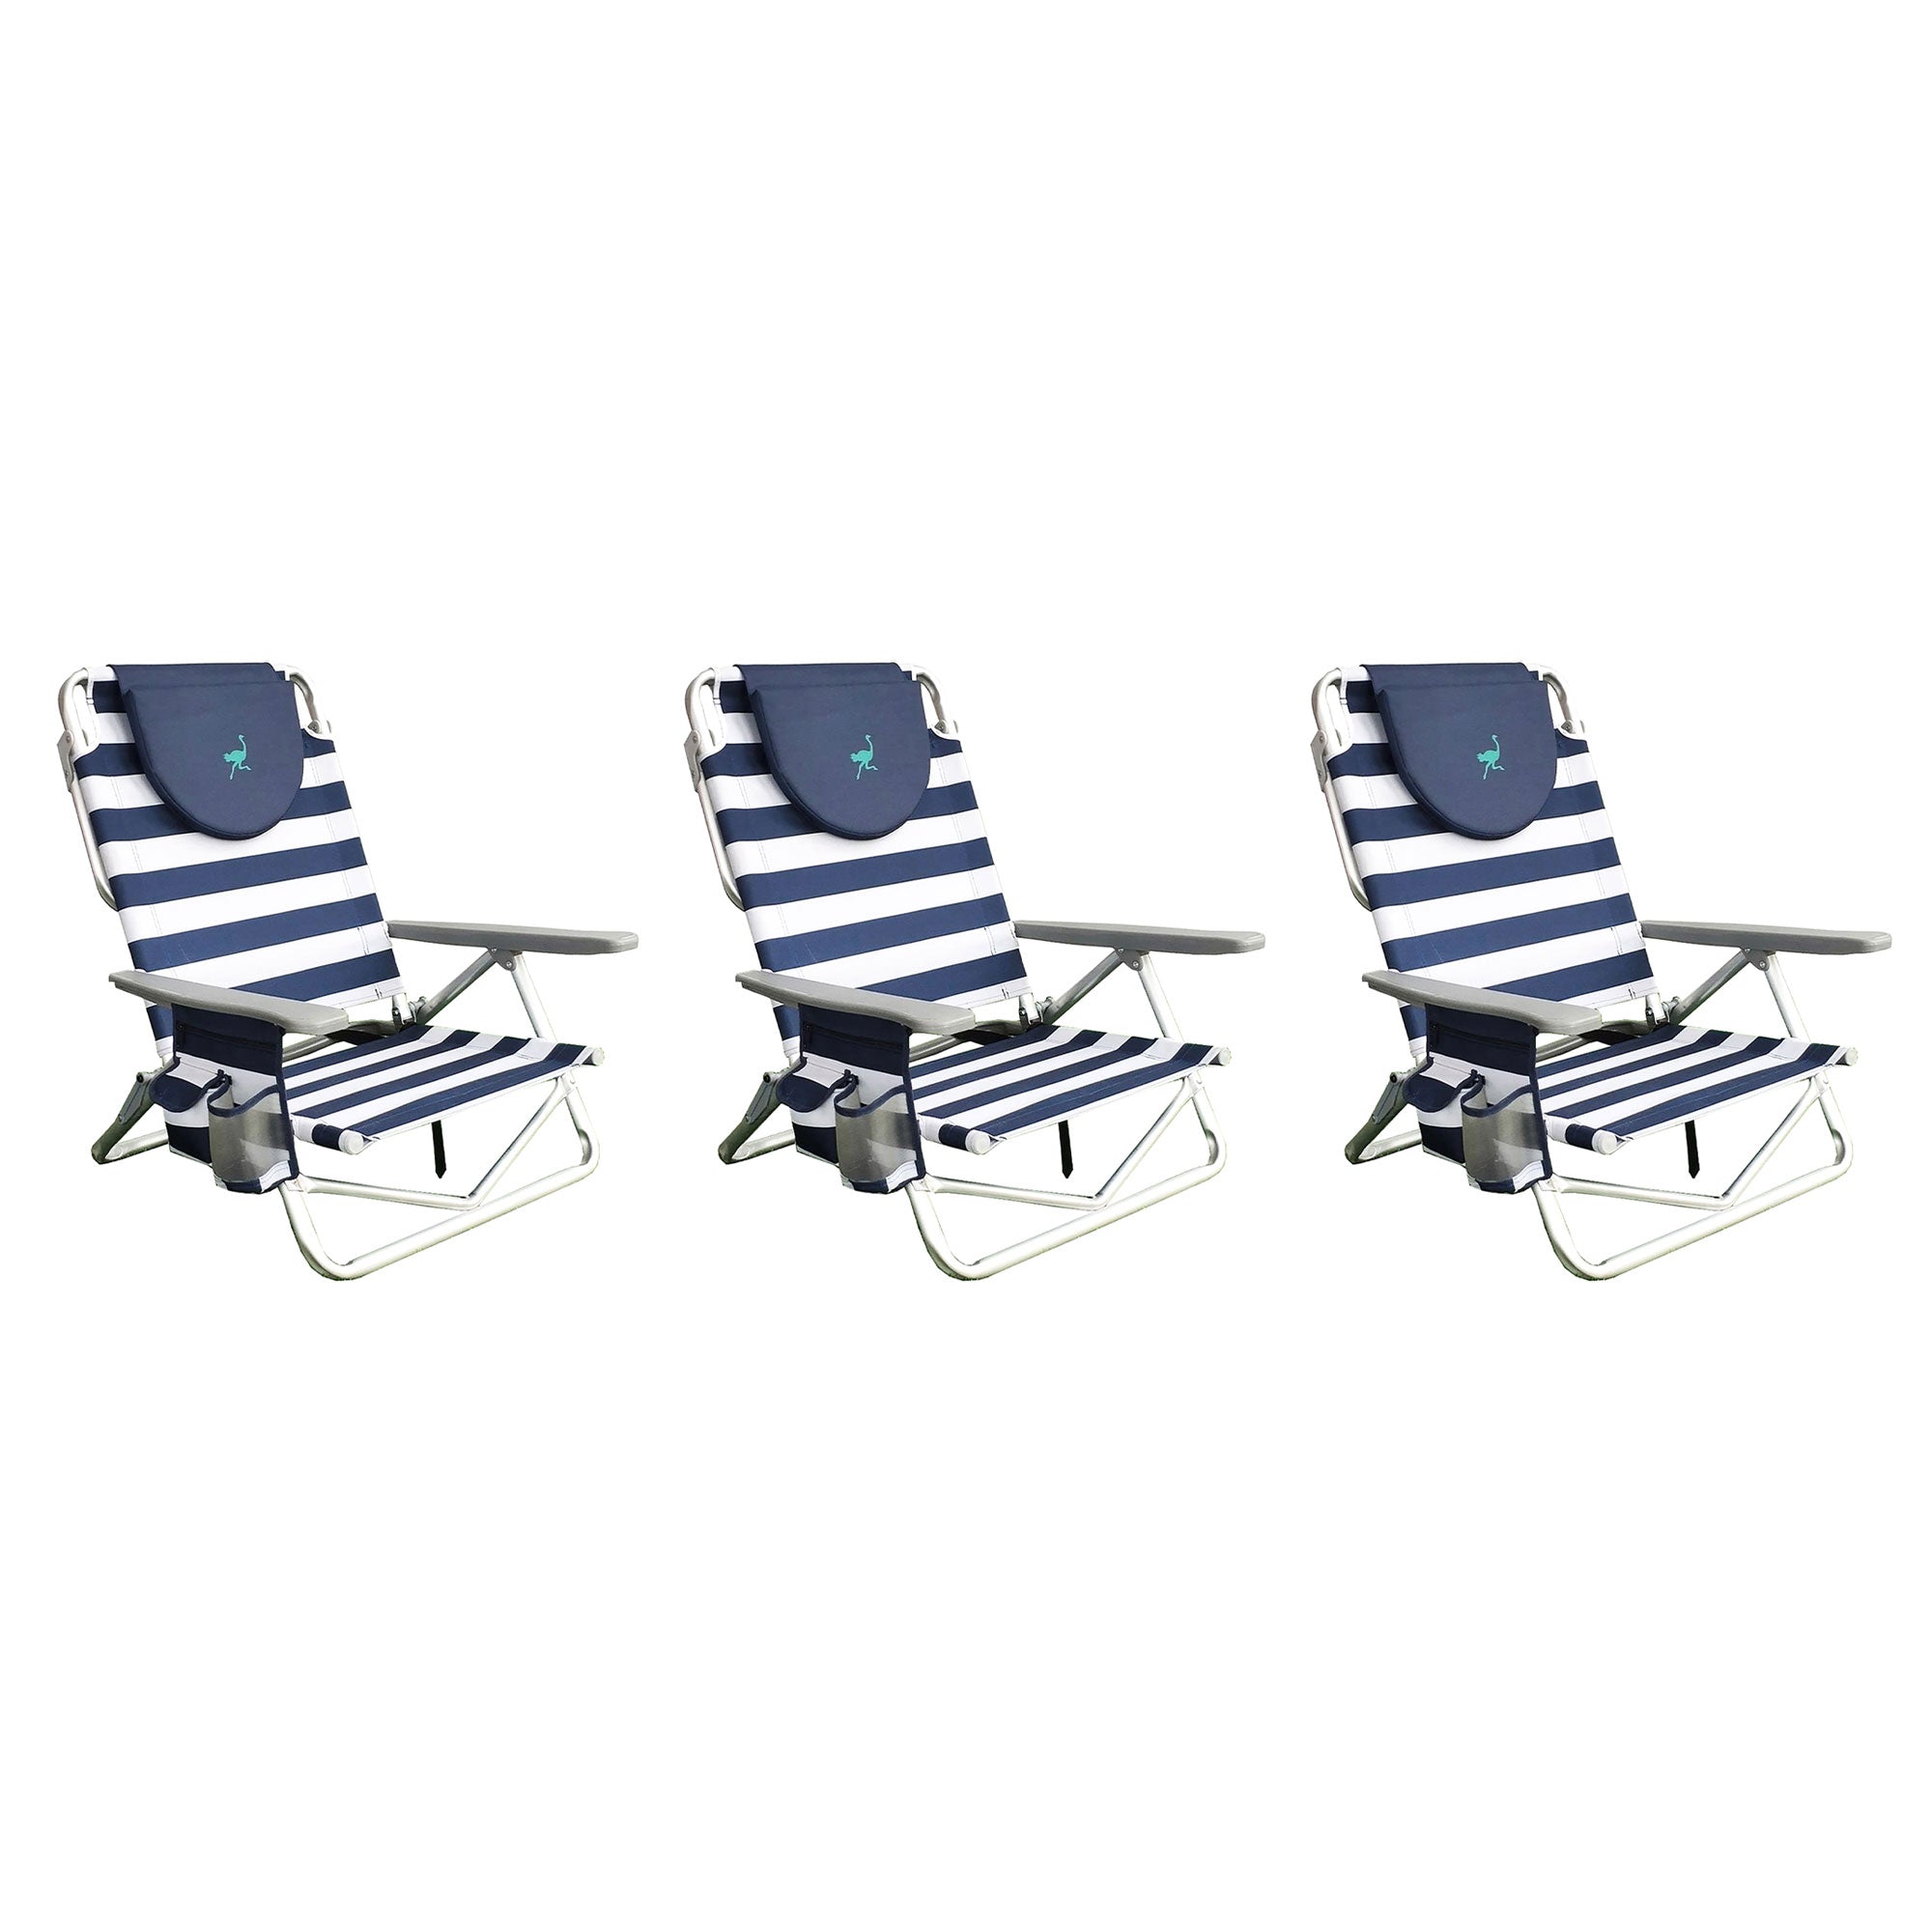 Ostrich-on-Your-Back-Sand-Beach-6-Inch-Off-the-Ground-Lounge-Chair-(3-Pack)-Chairs-&-Seating